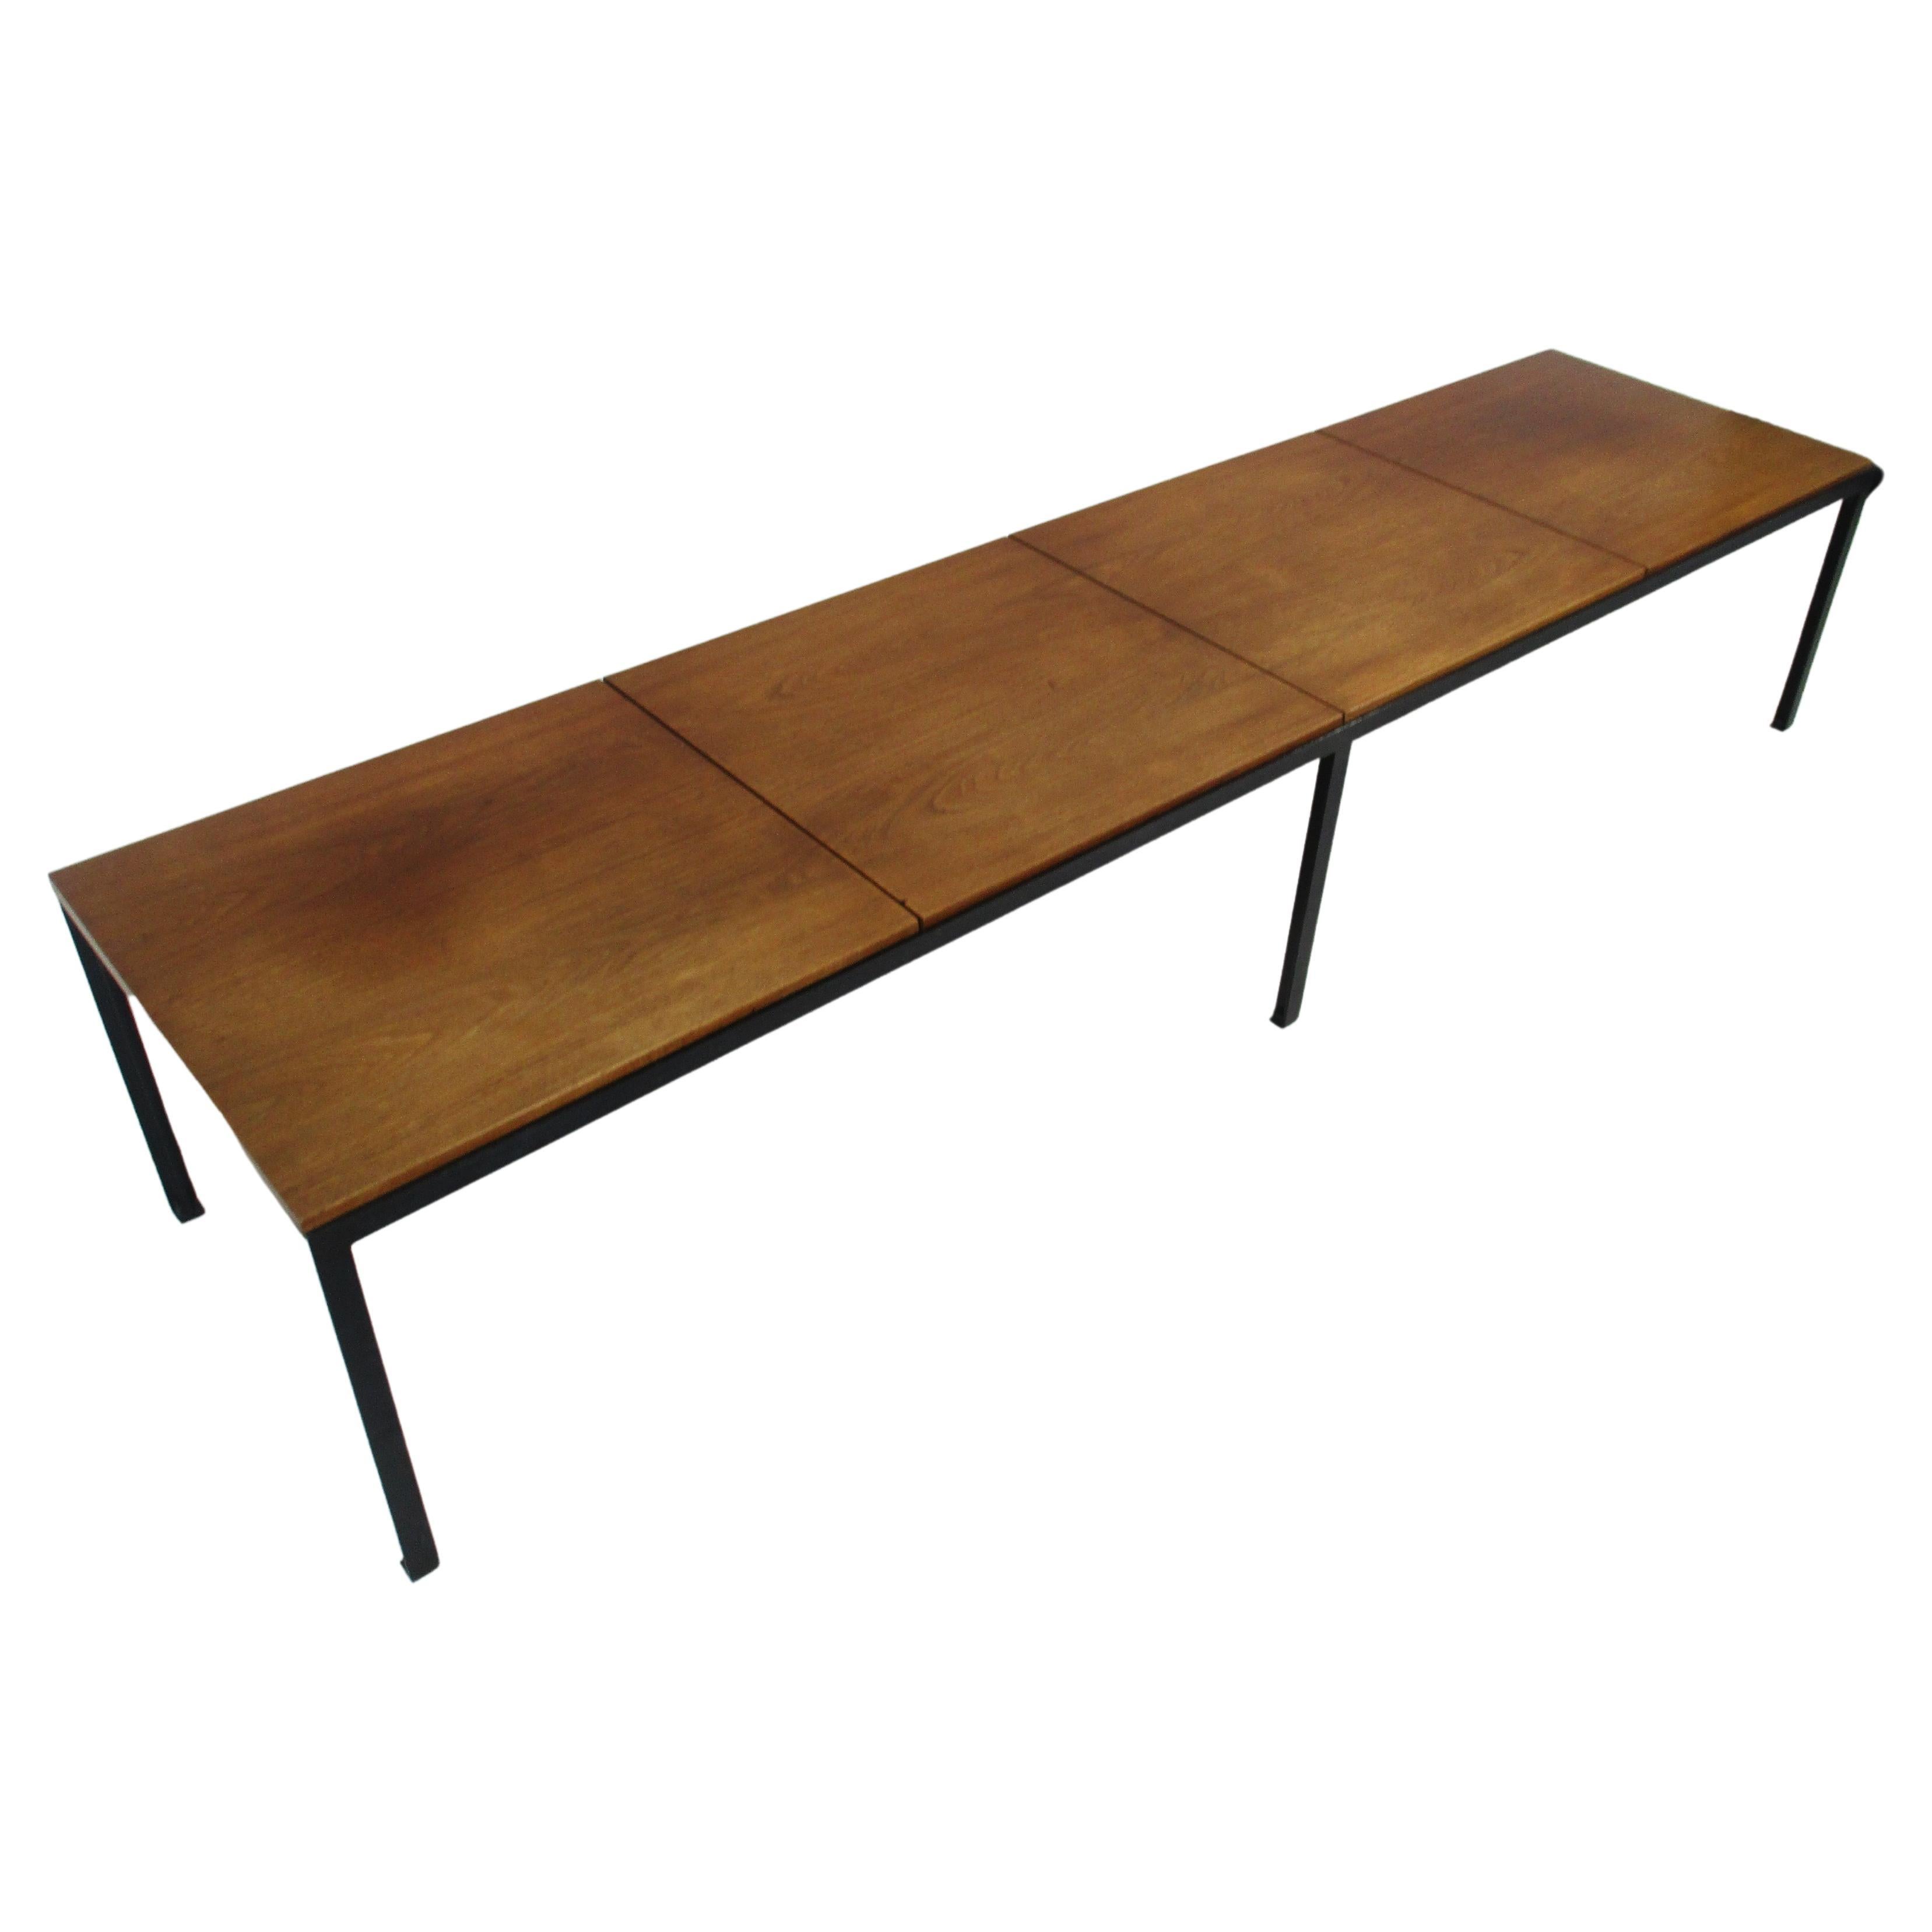 Early T Angle Walnut Coffee Table / Bench by Florence Knoll # 332 for Knoll (B)  For Sale